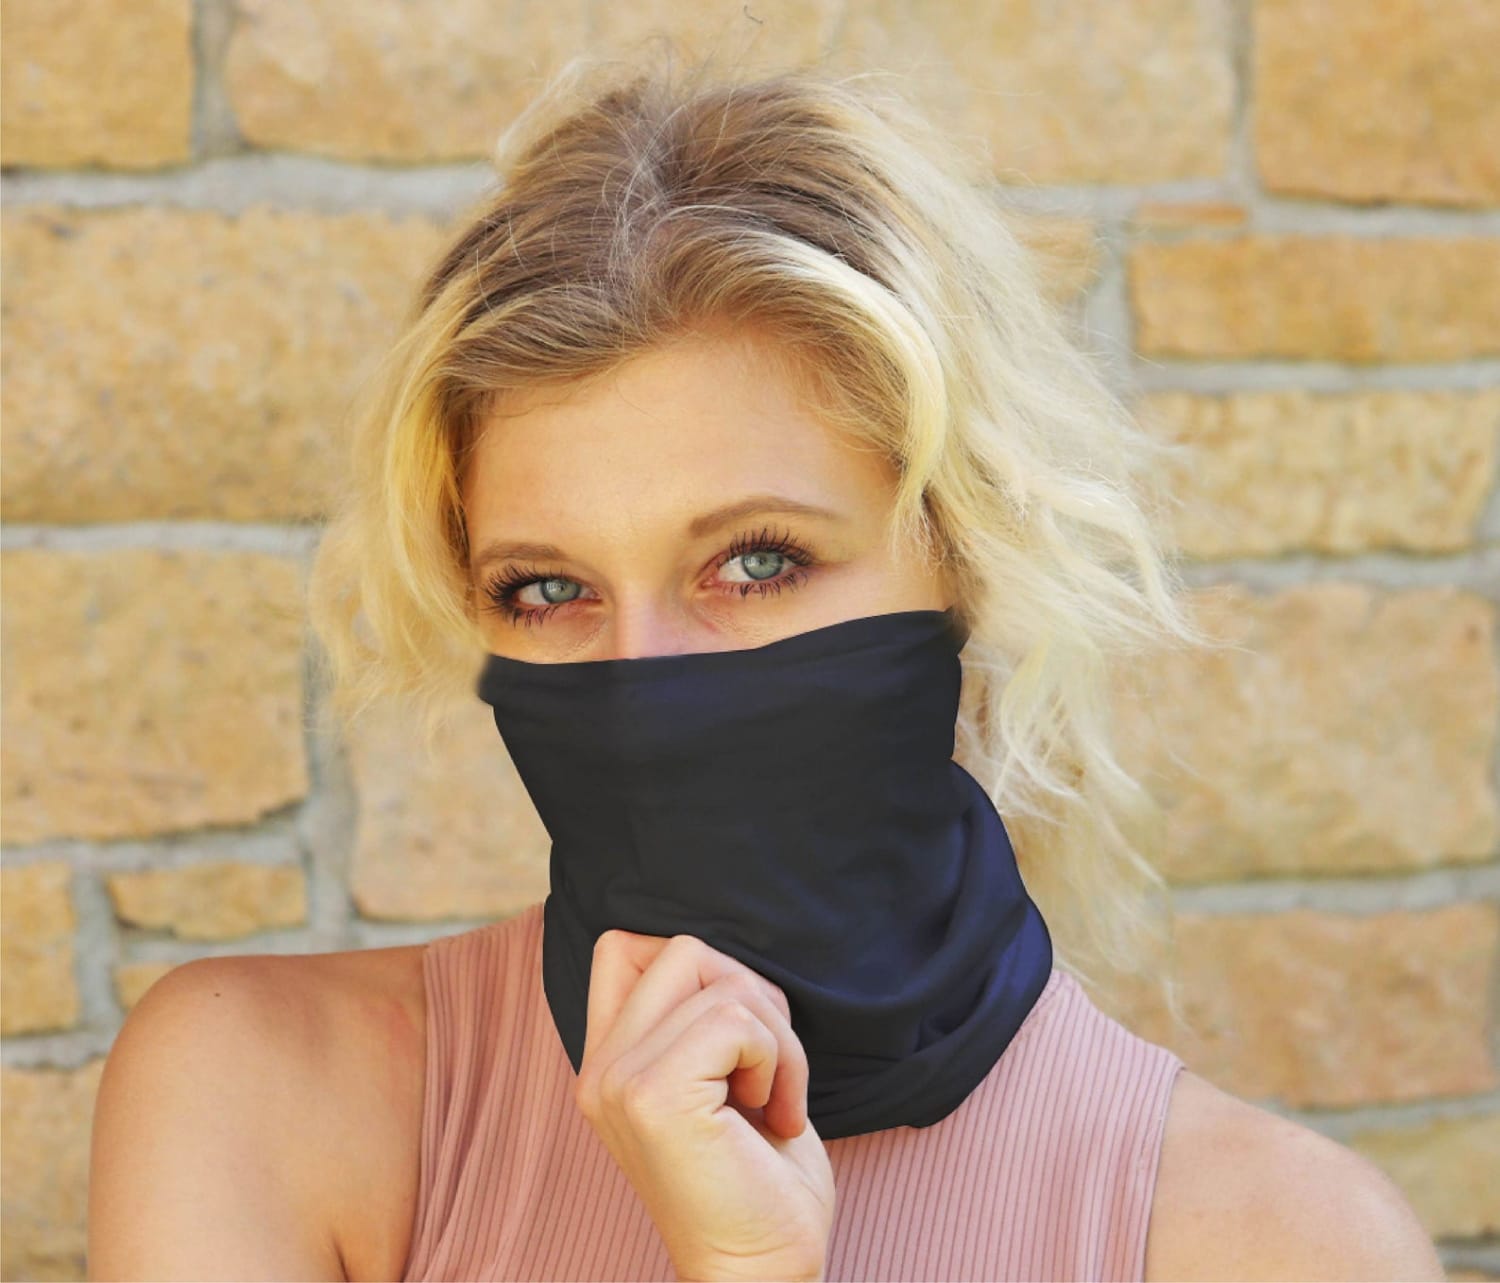 How to a neck gaiter protect against Covid